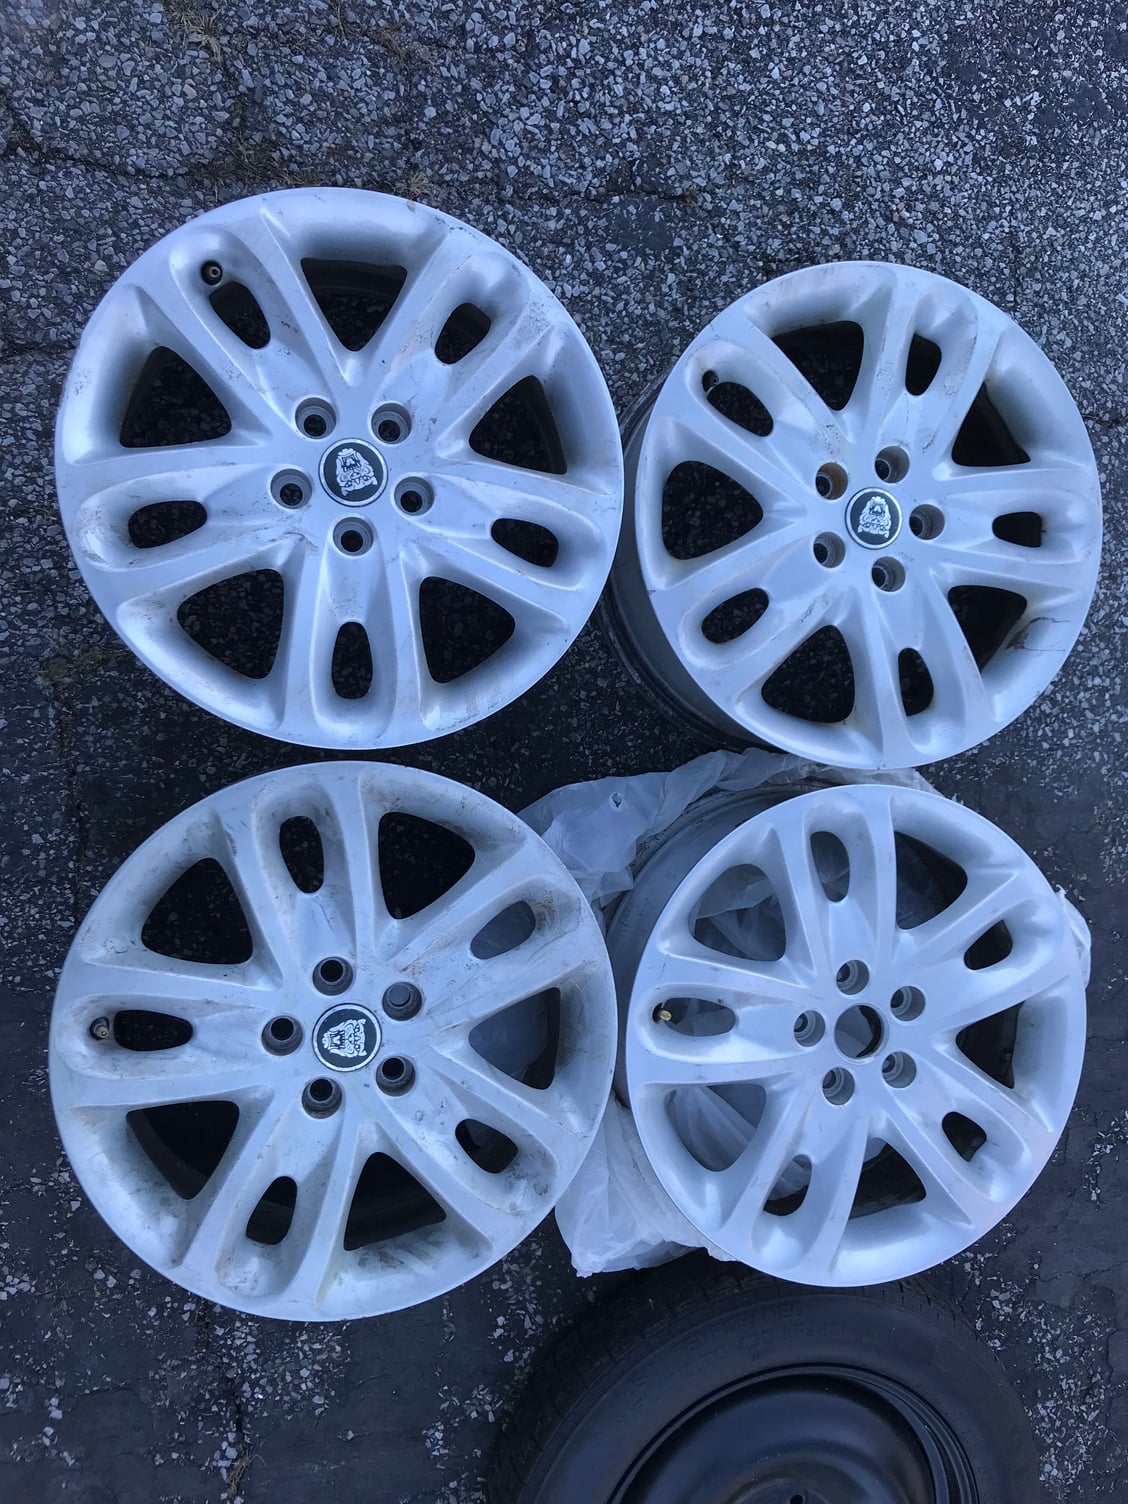 Wheels and Tires/Axles - 4 Aguila Rims and Factory Spare - Used - 2002 to 2008 Jaguar X-Type - Suffolk County, NY 11730, United States